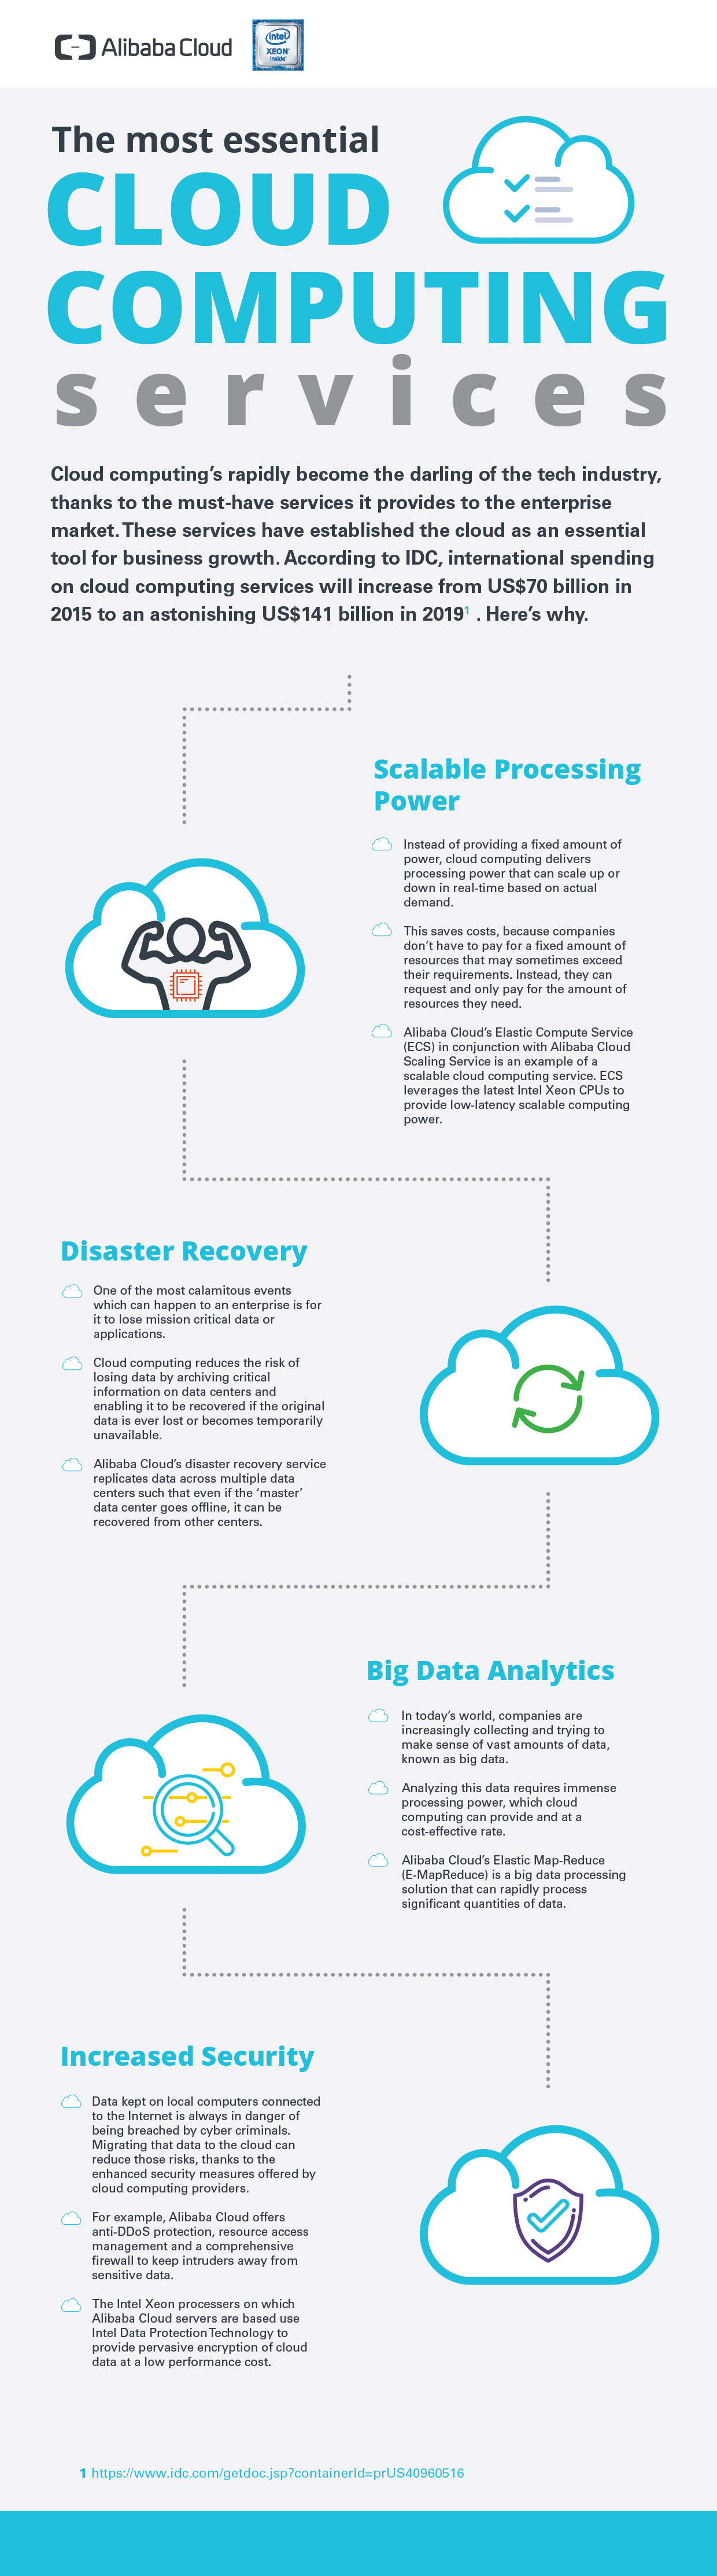 Infographic_The_Most_Essential_Cloud_Computing_Services